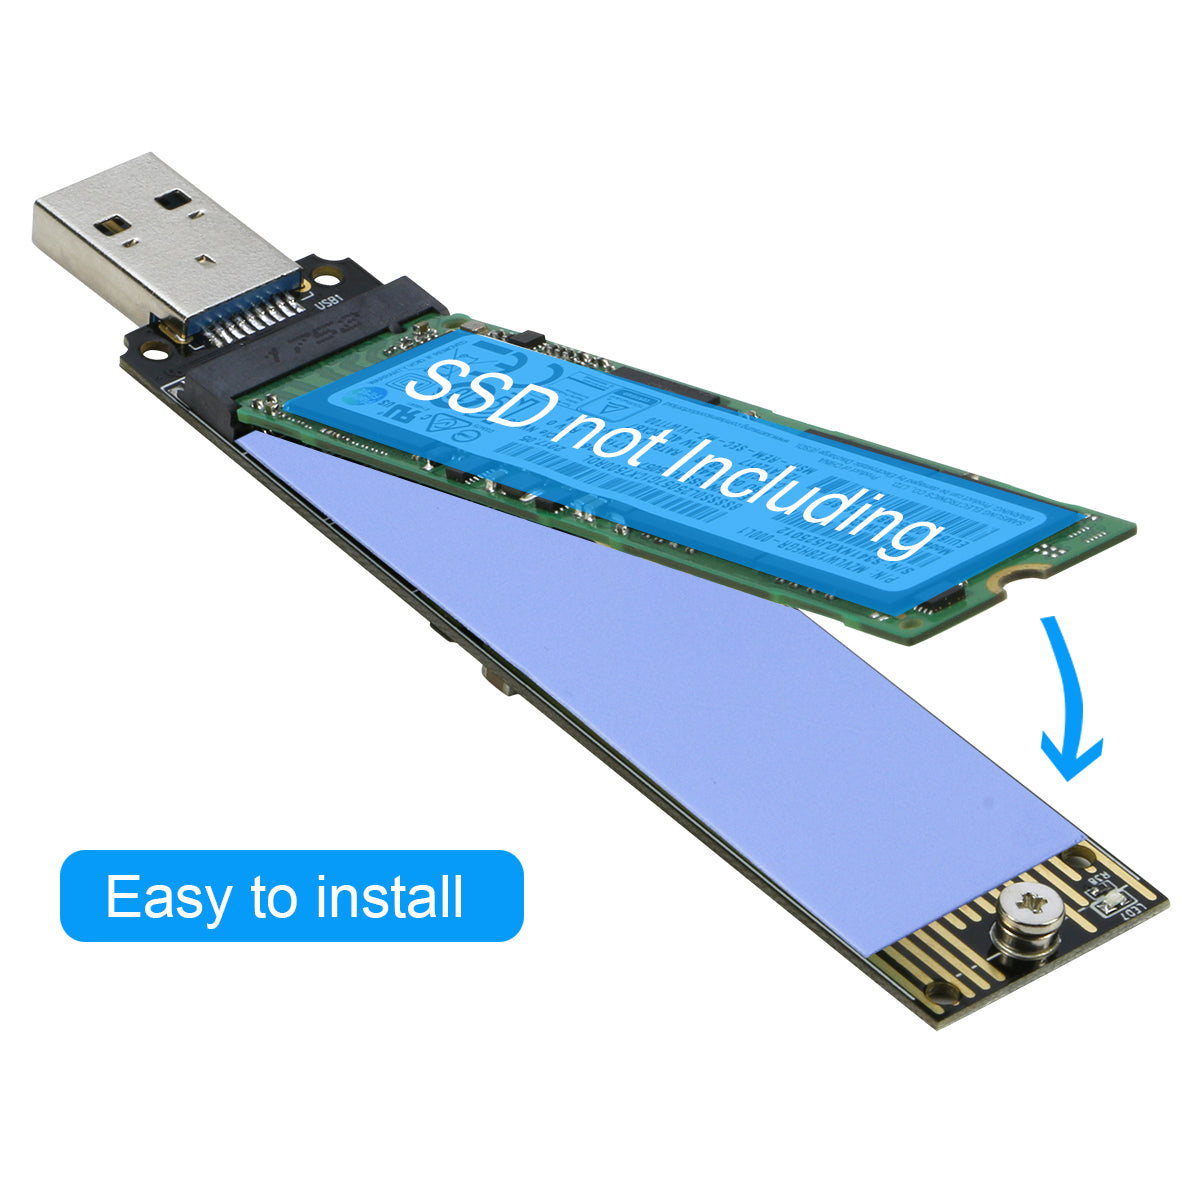  M.2 to USB Adapter, RIITOP NVMe to USB 3.1 Reader Card  Compatible with Both NVMe (PCI-e) M Key SSD & (B+M Key SATA Based) NGFF SSD  : Electronics